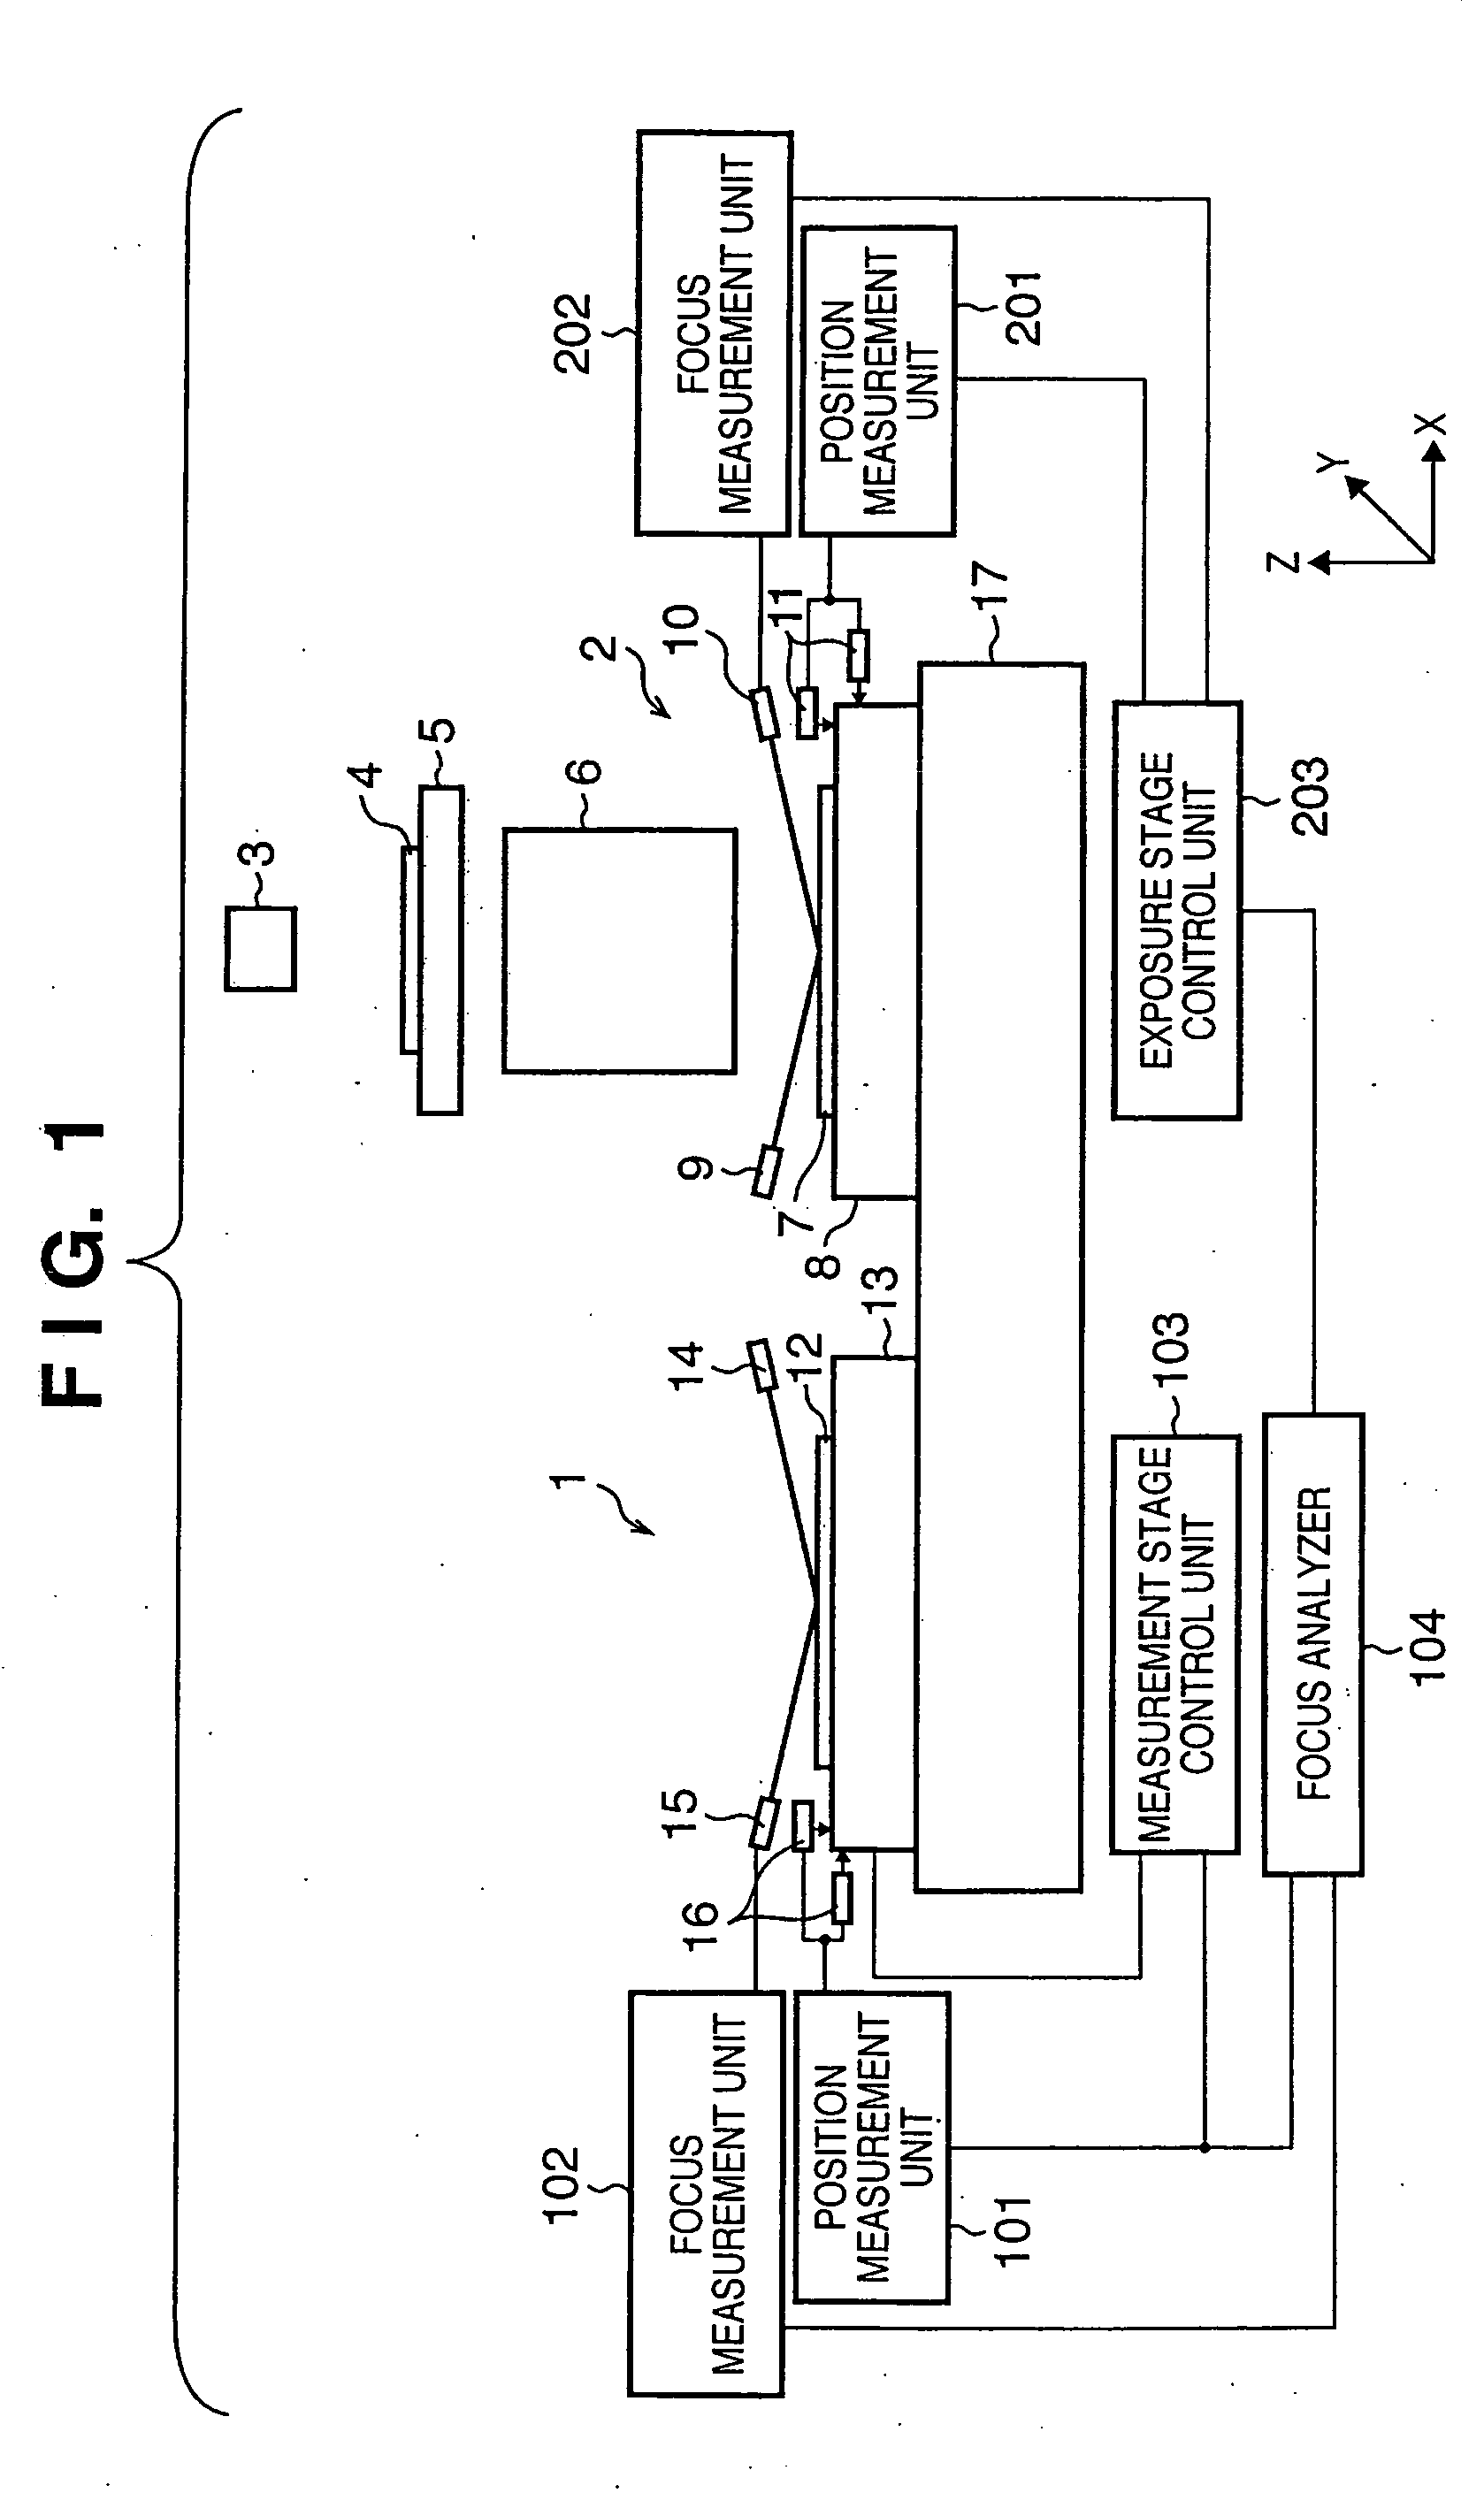 Stage control apparatus and method, stage apparatus and exposure apparatus